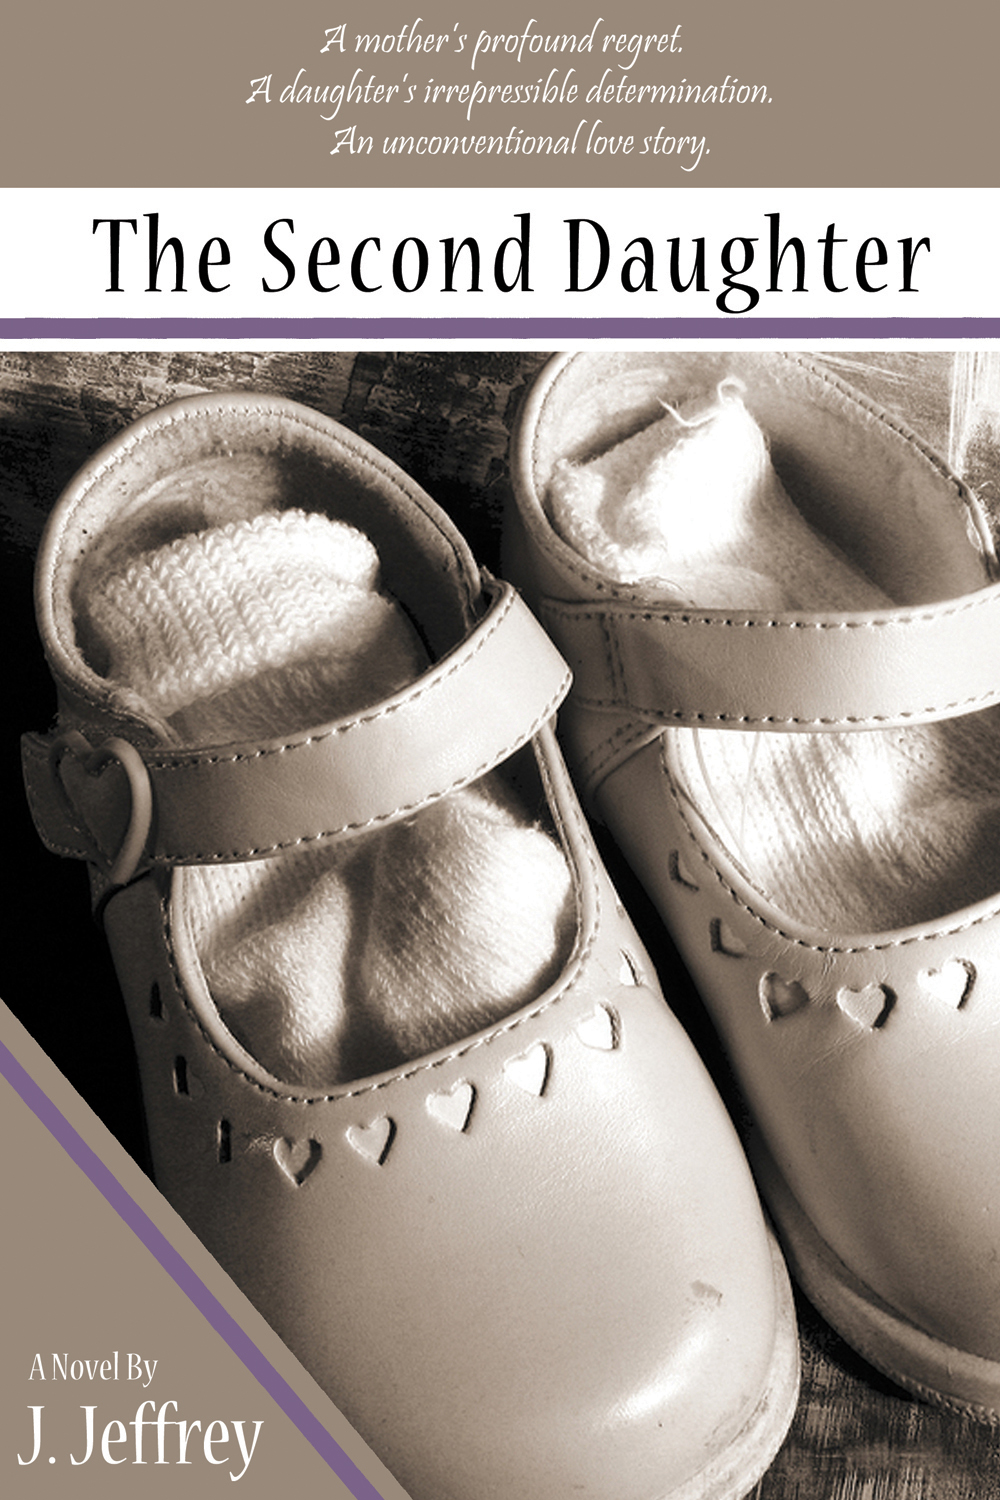 New Release: The Second Daughter